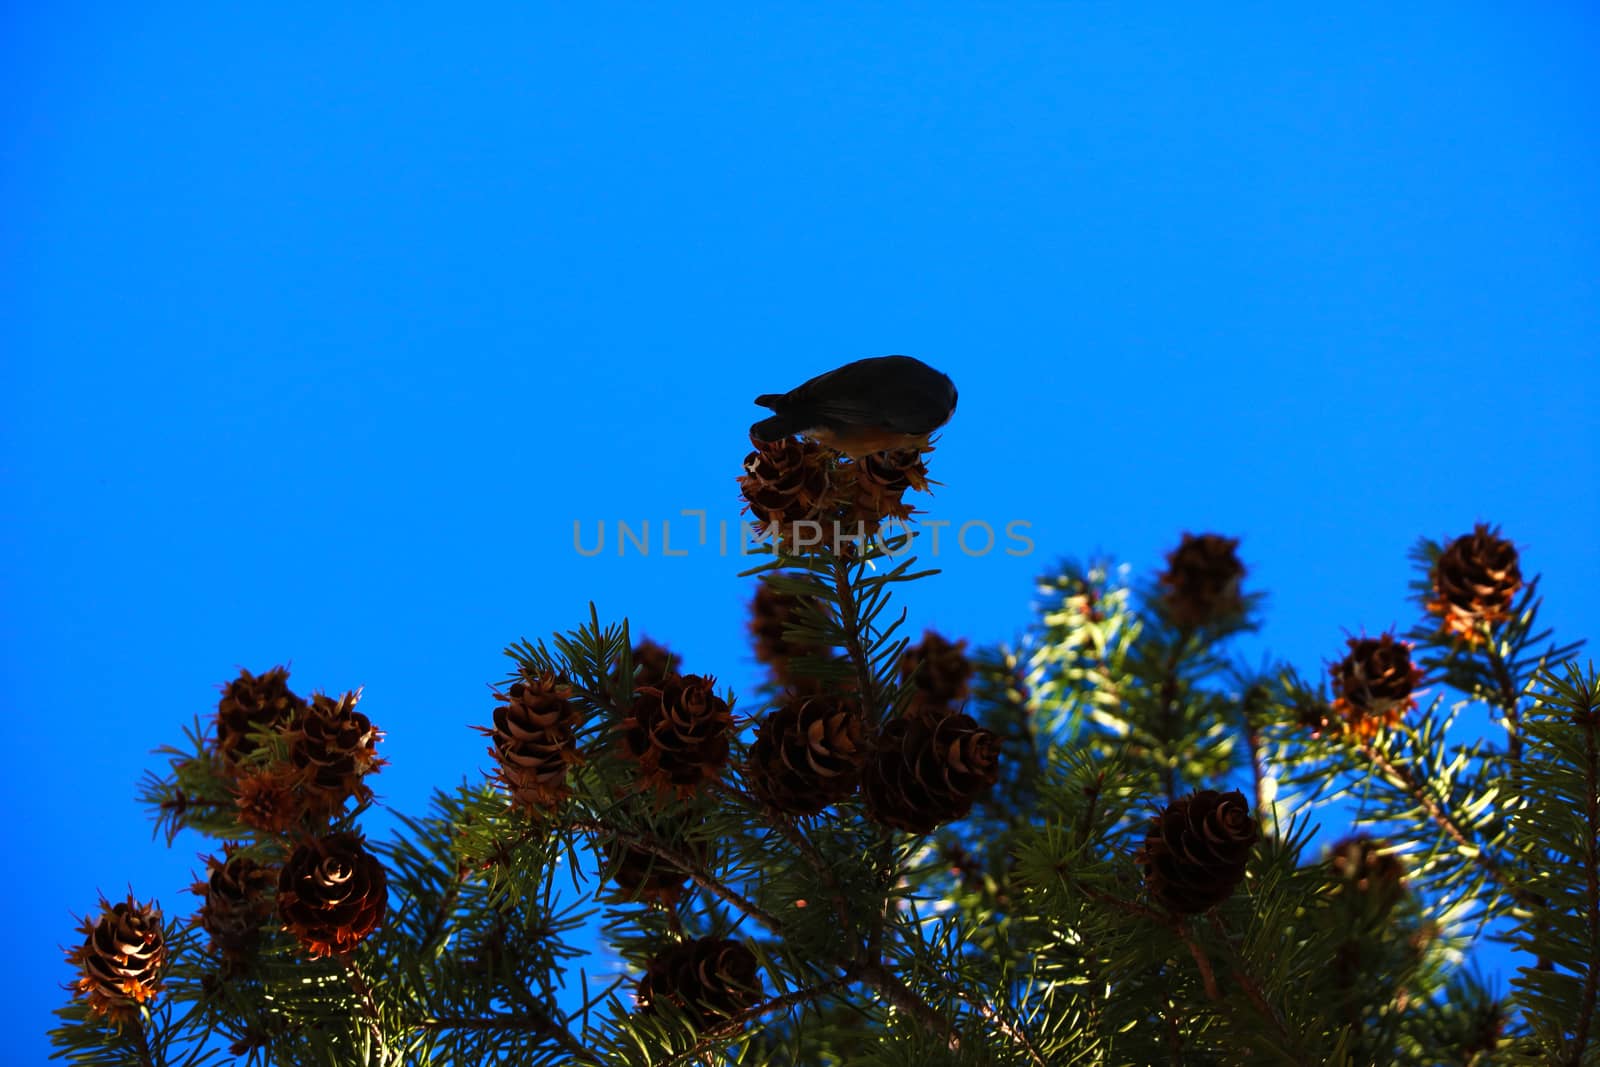 View of pine branches and cones against the blue sky